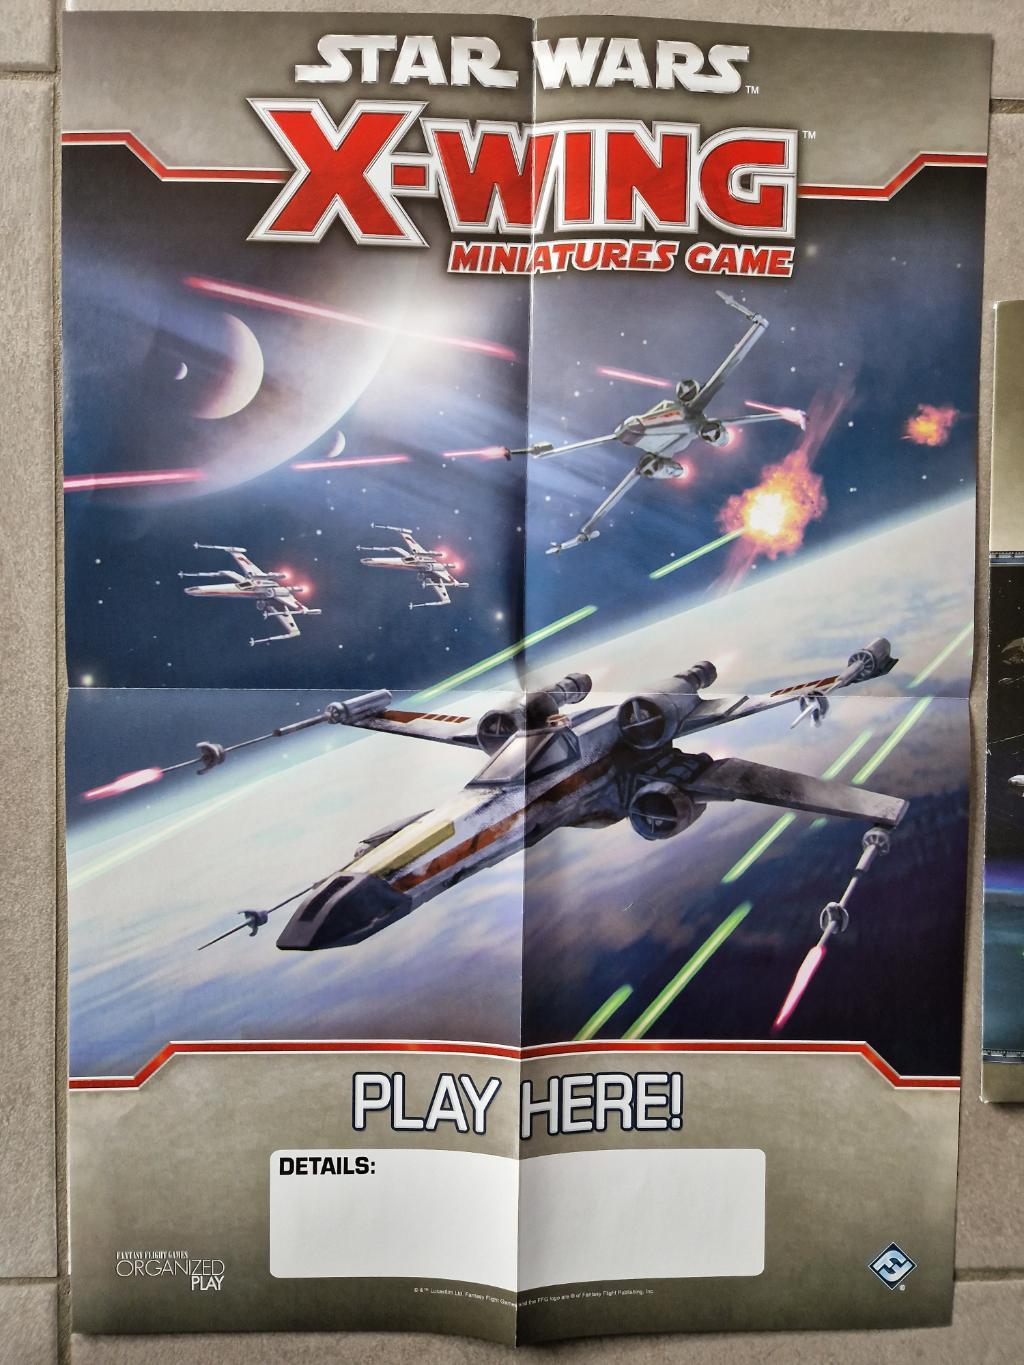 X-wing 1.0 - Le Jeu De Figurines - Affiche Star Wars X-wing Fighter - Organized Play